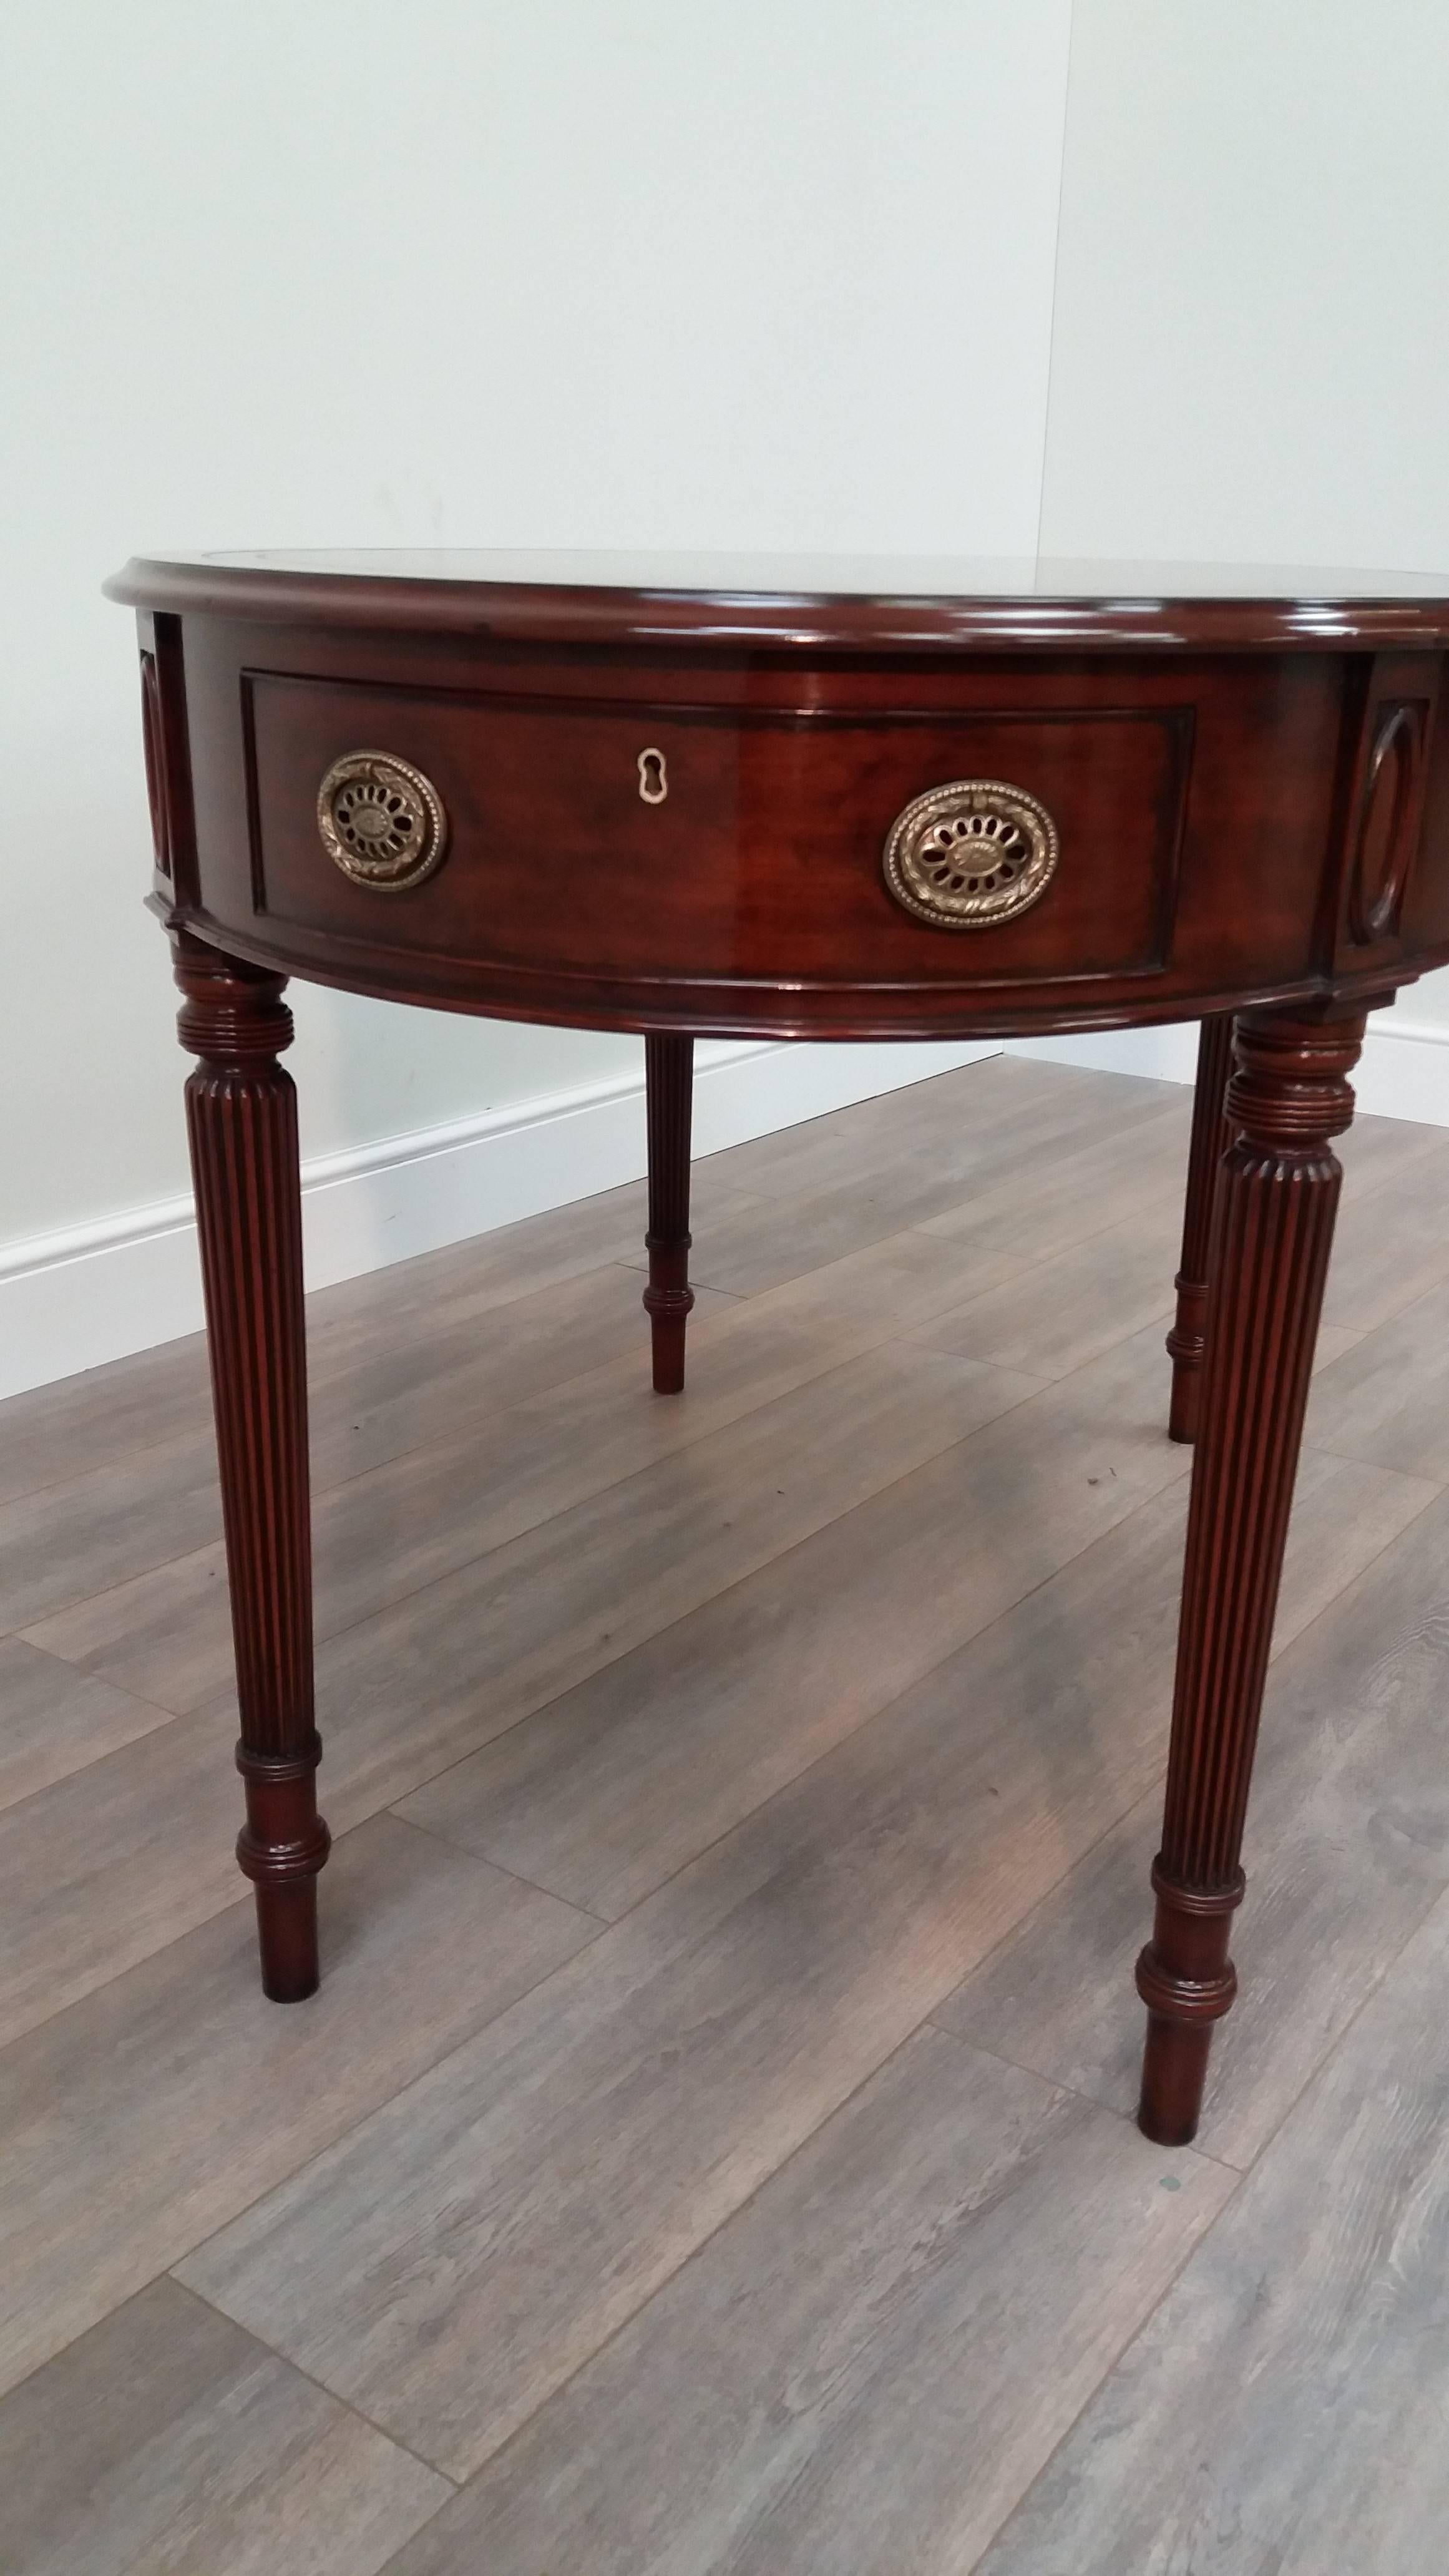 Arthur Brett Regency-style Mahogany Oval Writing Table with Leather Top In Excellent Condition For Sale In London, GB